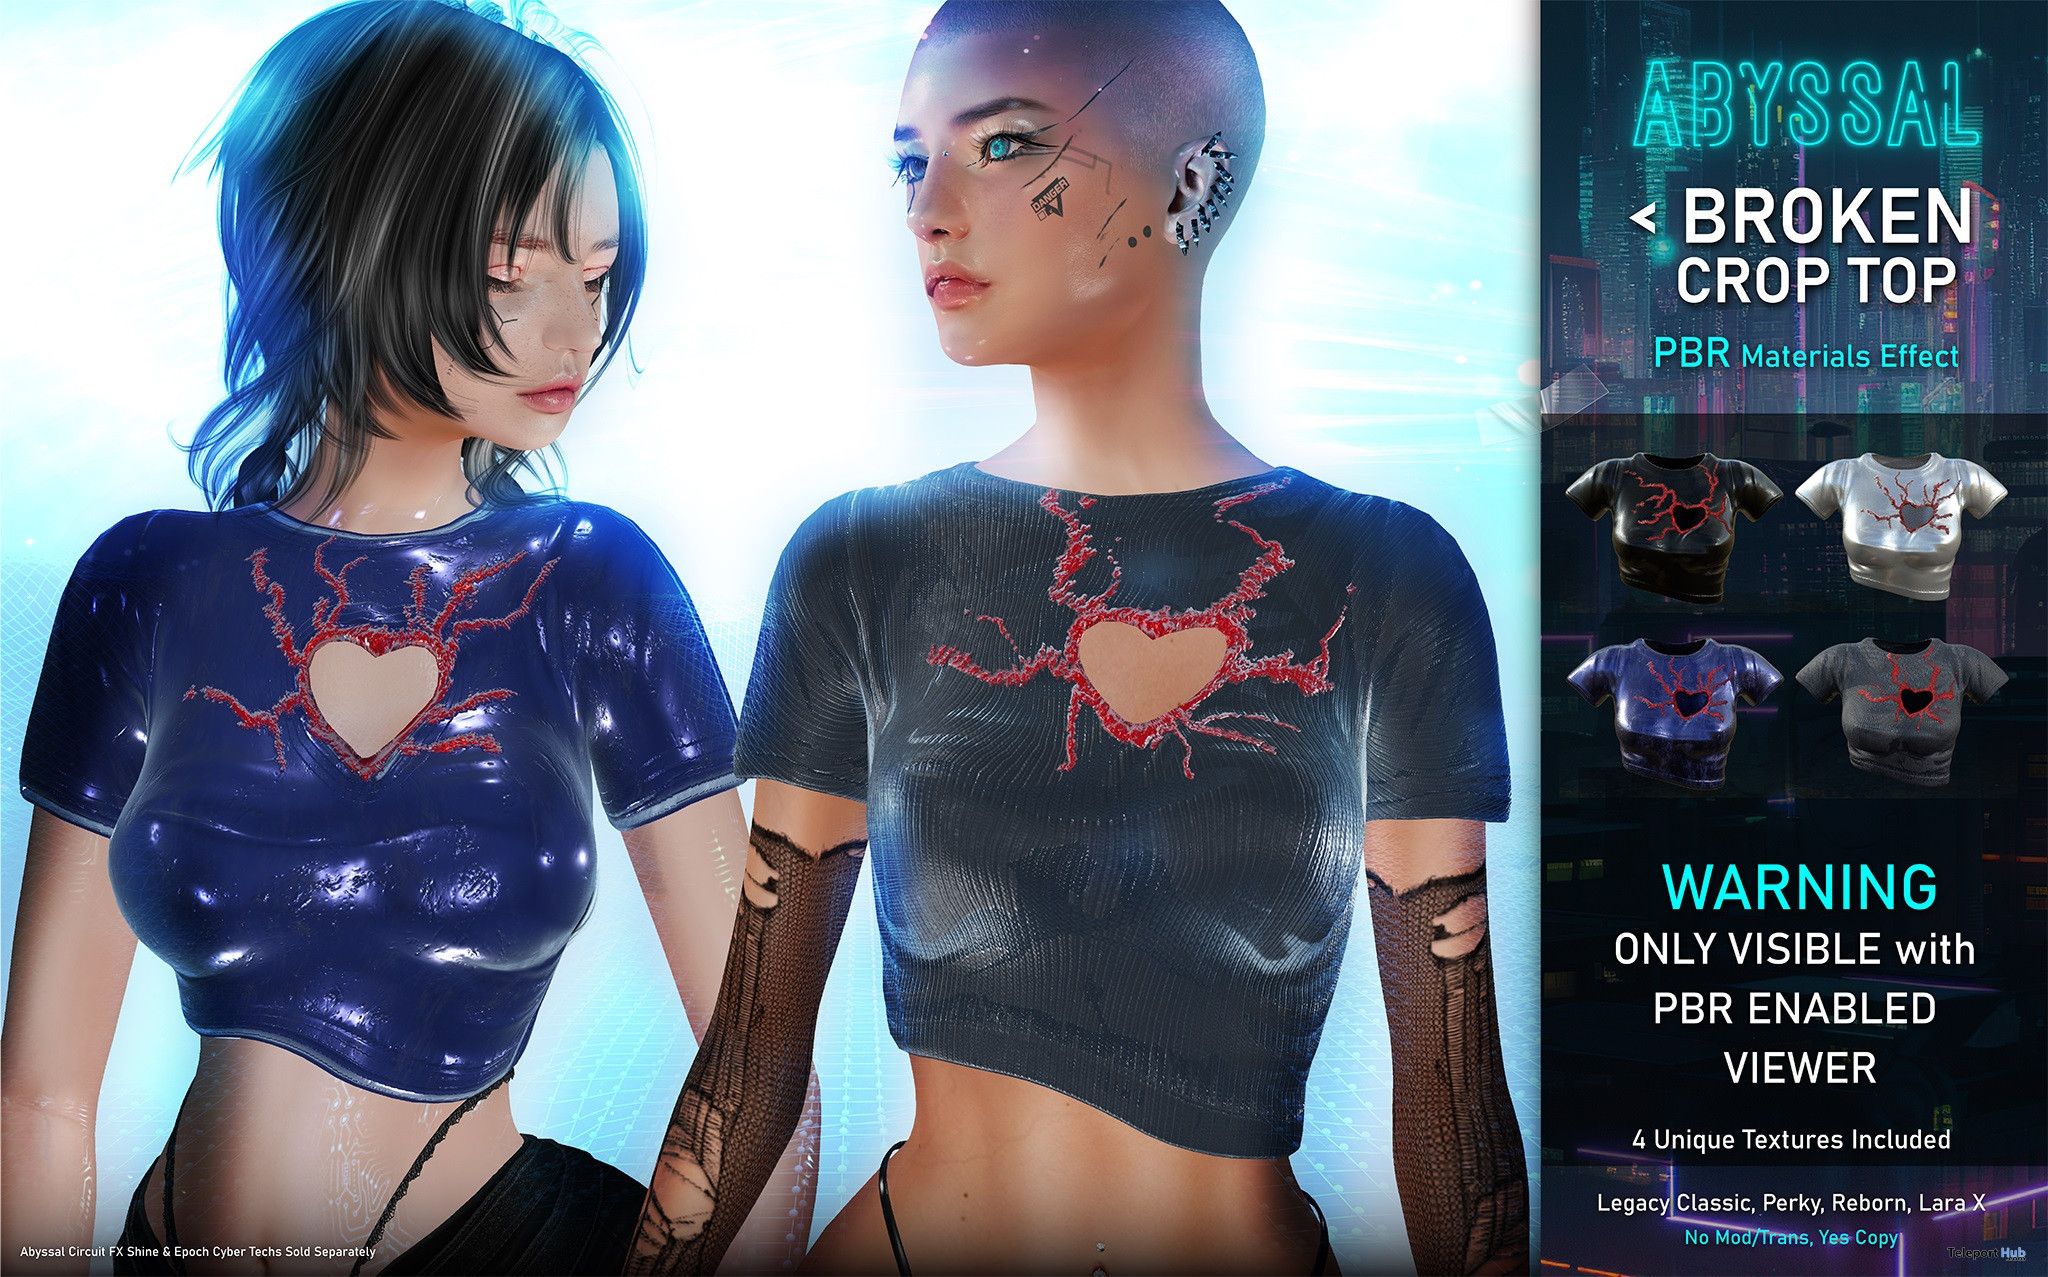 Broken Crop Top With PBR Materials 45% Off Promo by ABYSSAL - Teleport Hub - teleporthub.com